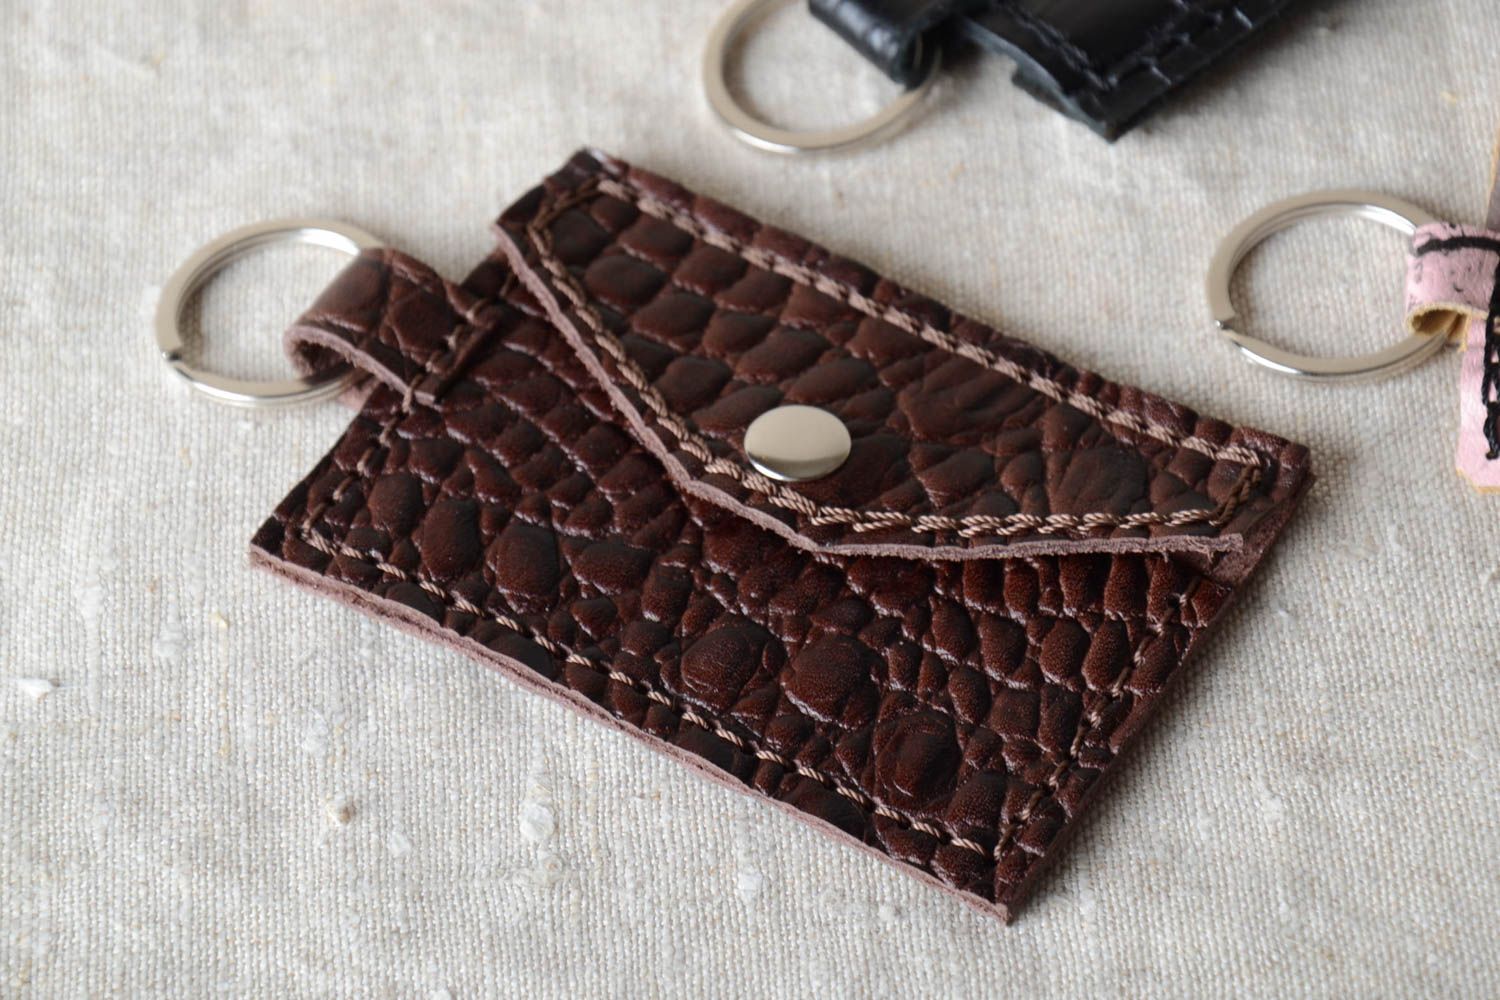 Wallets for Men & Key Holders as Christmas Gifts